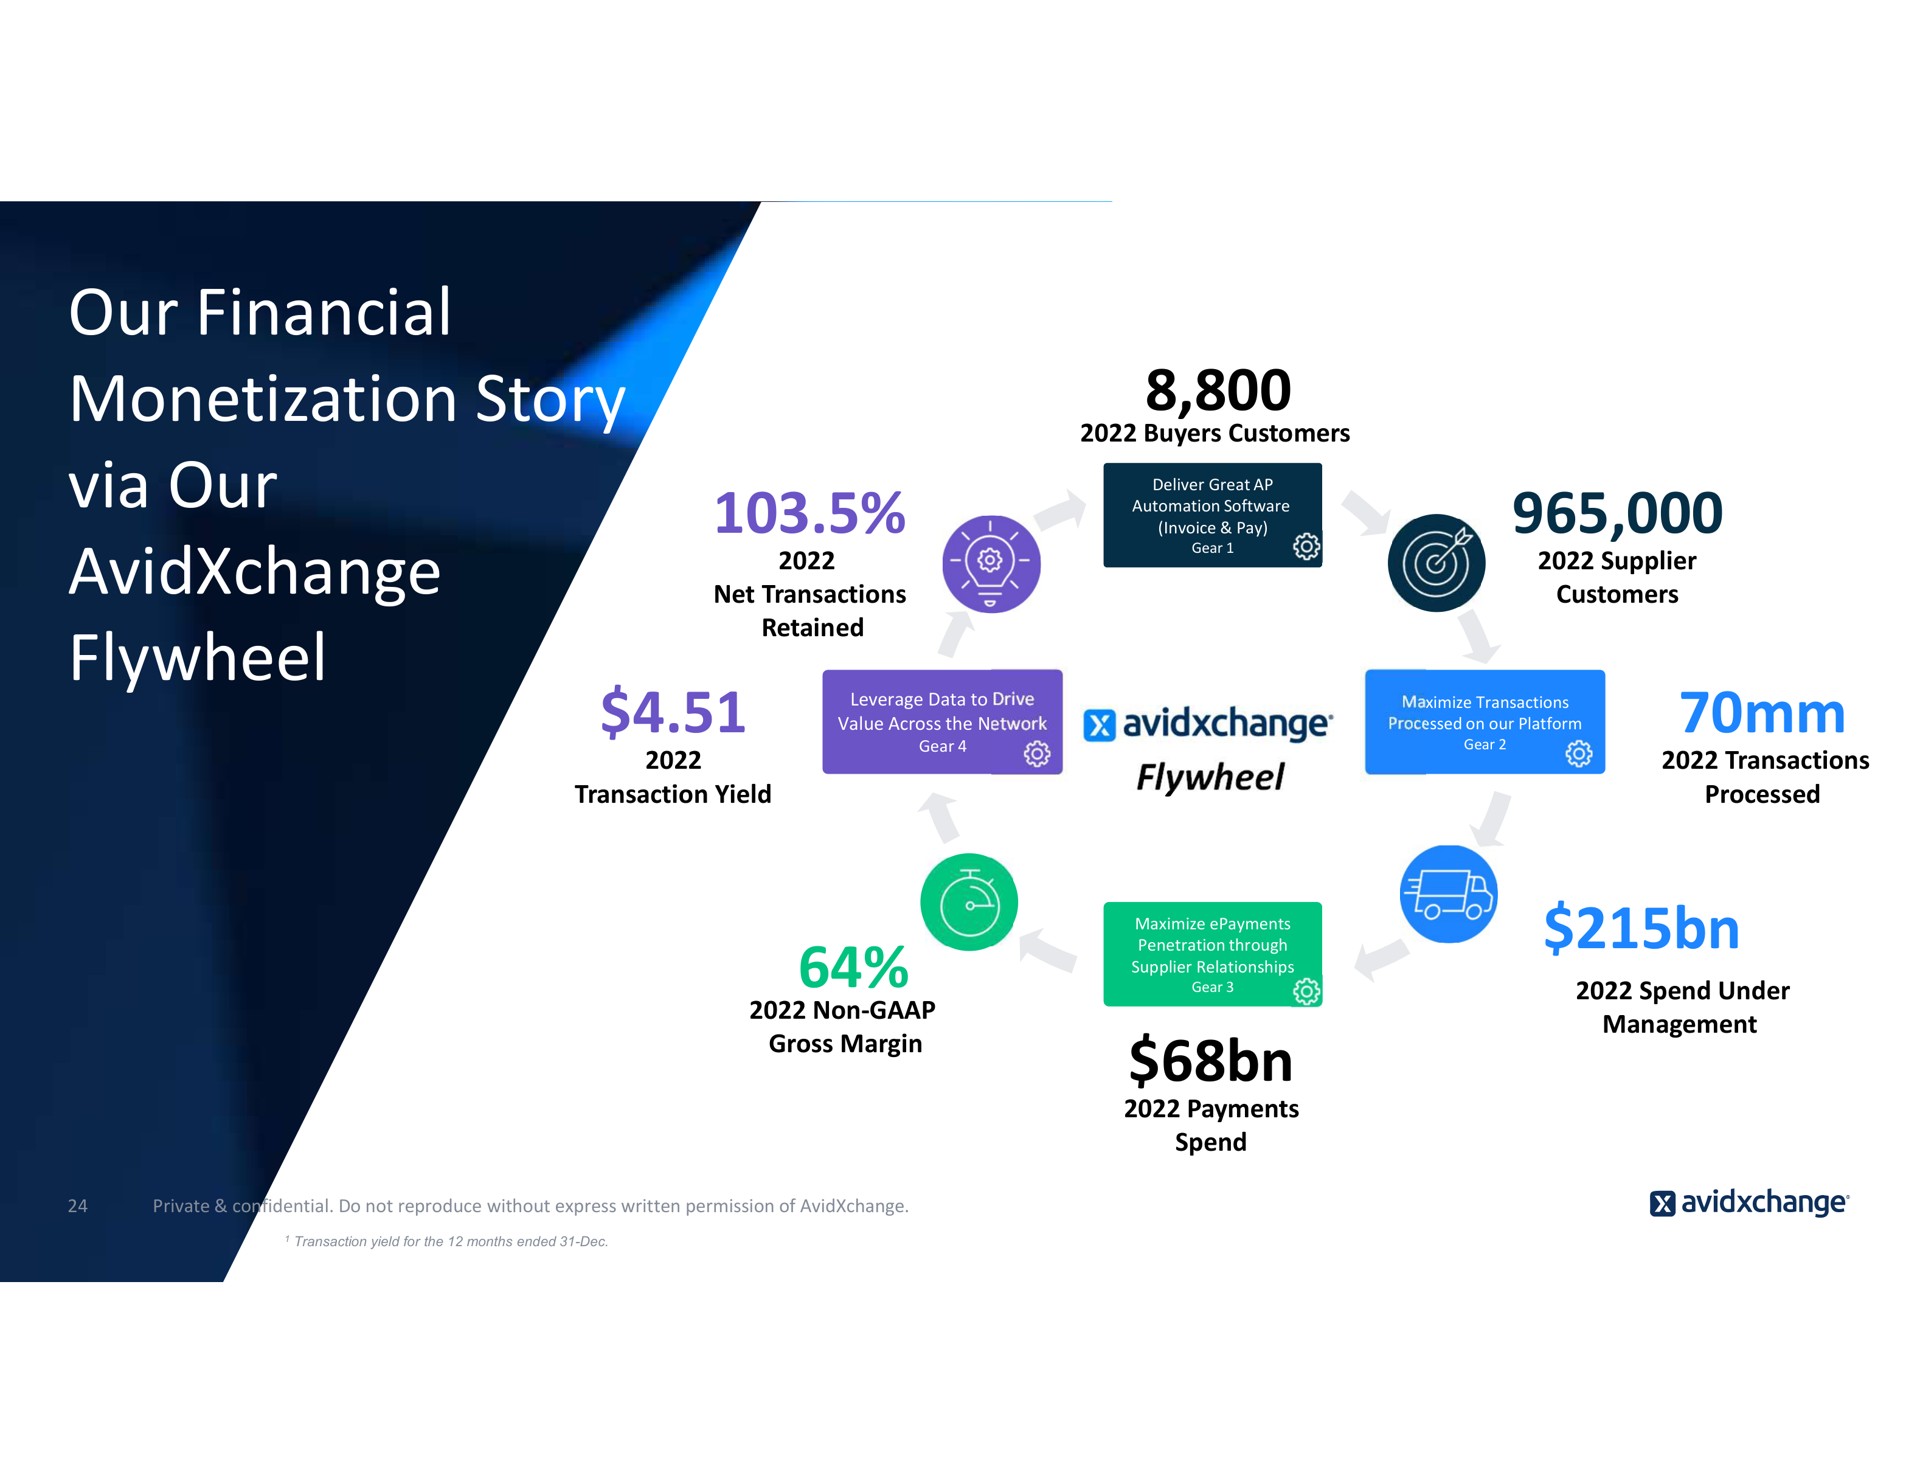 our financial monetization story via our flywheel rot are | AvidXchange